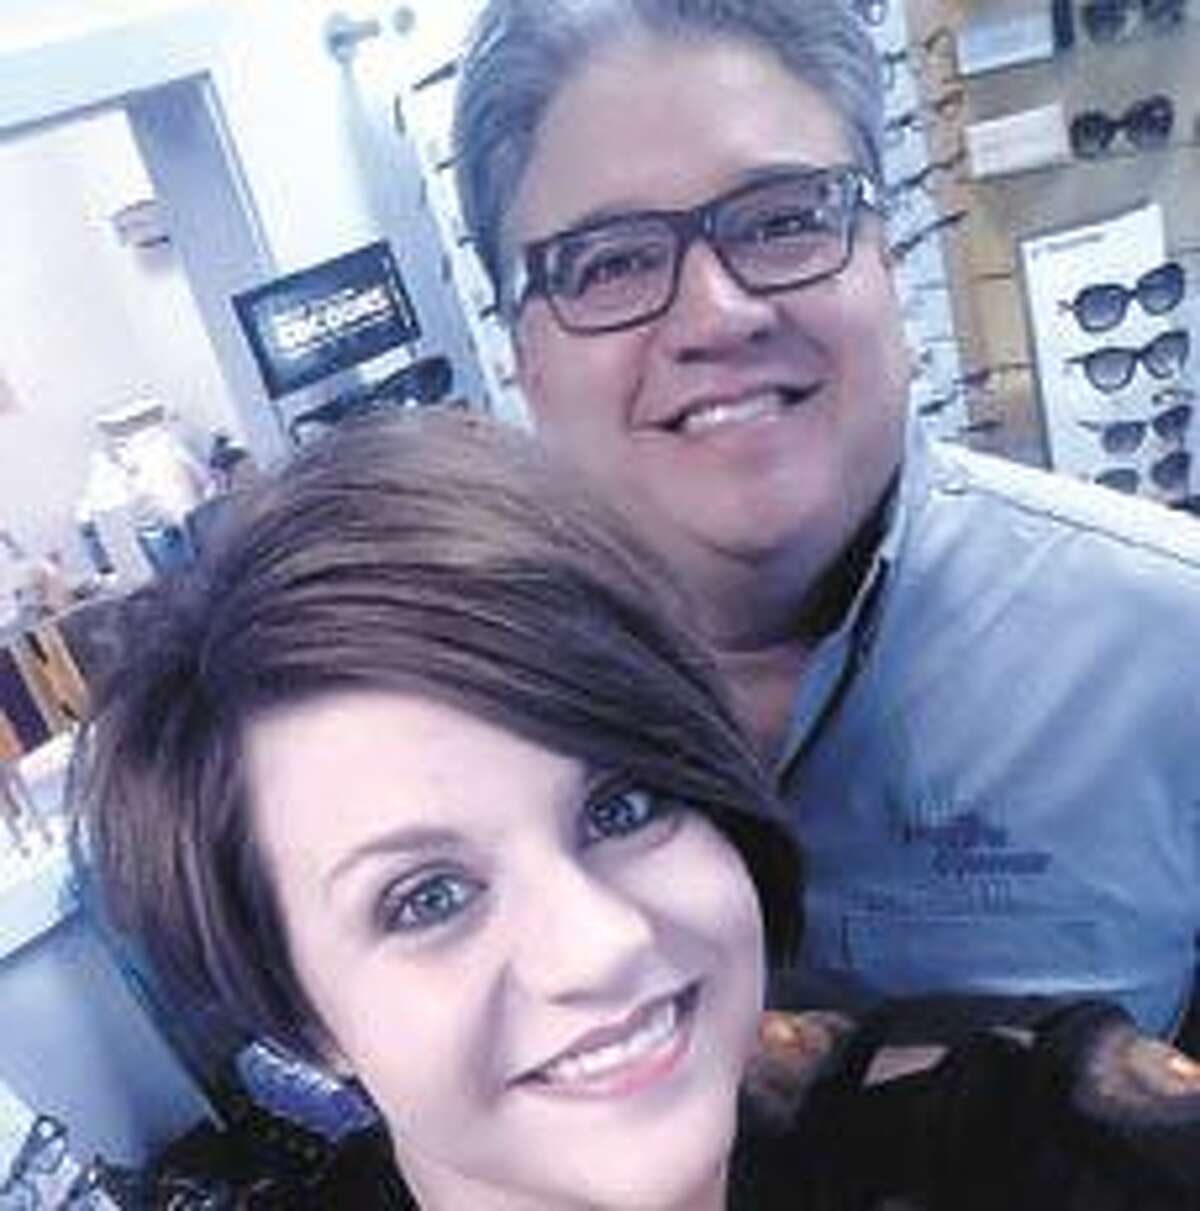 Paul Garza and his daughter, Shannon, are ready to help you look and see your best at Imagine Eyewear. They’re at 4400 N. Midland Drive, in the Cornerstone Shopping Center.